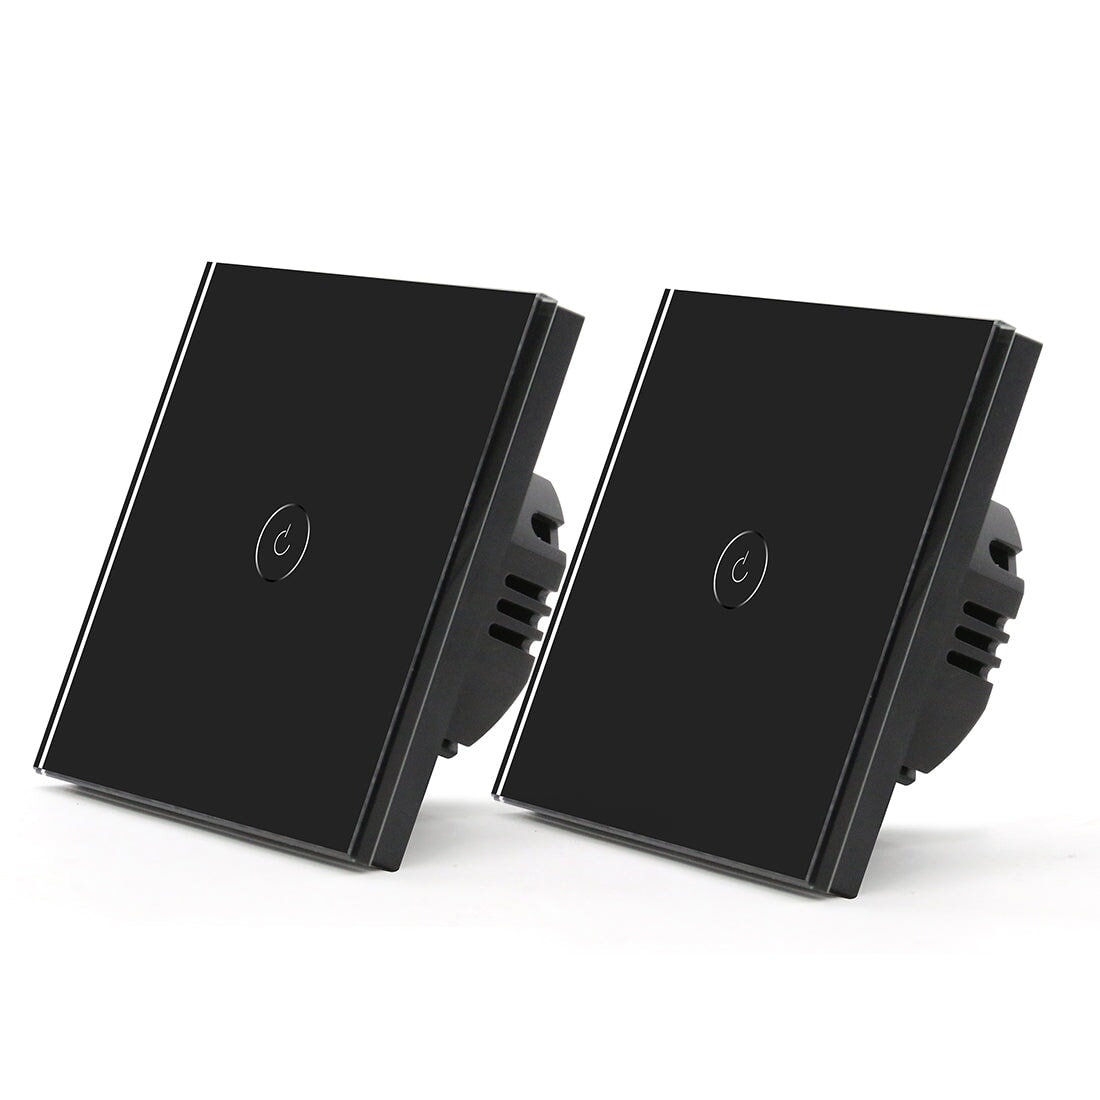 Bseed Smart Wifi Touch Switch 1 Gang 1/2/3 Way Wall Plates & Covers Bseedswitch Black 2Pcs/Pack 